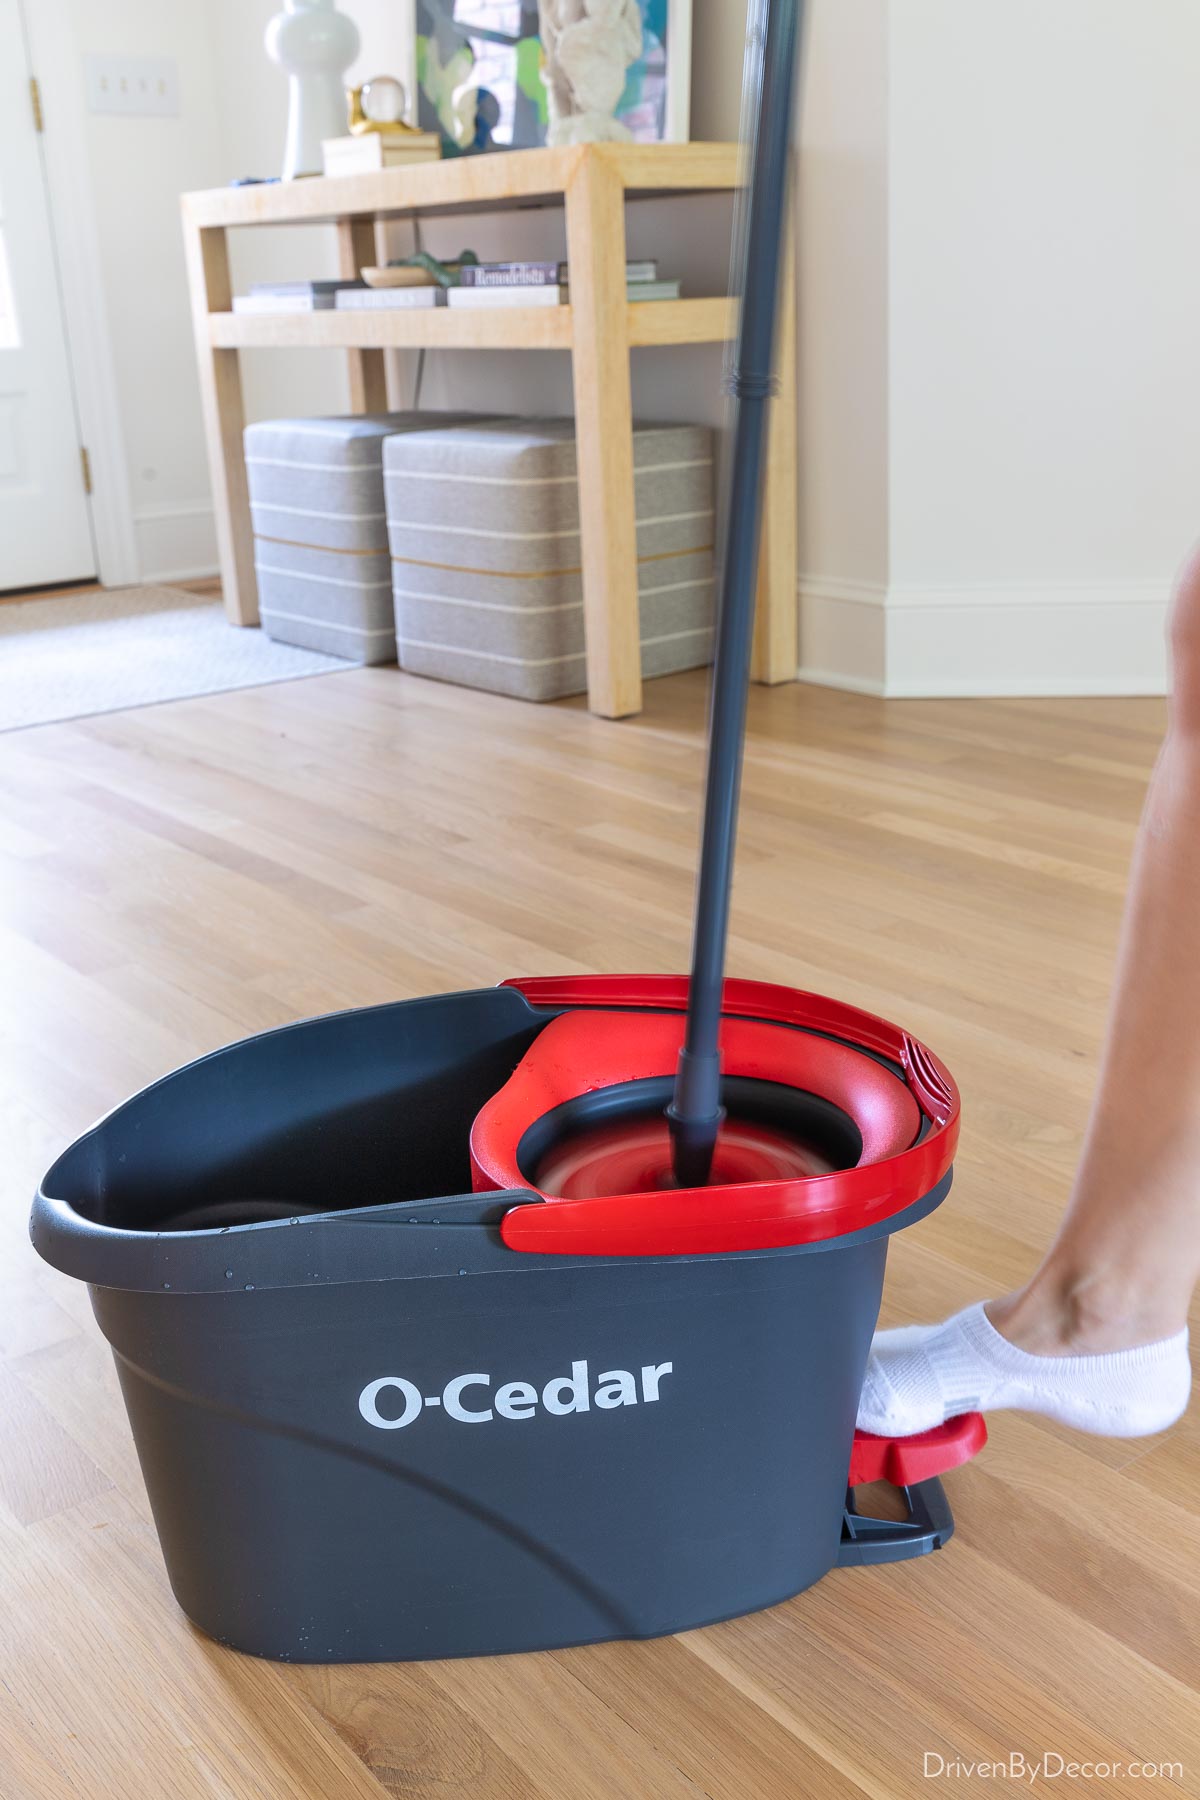 Using the spin mop to clean hardwood floors